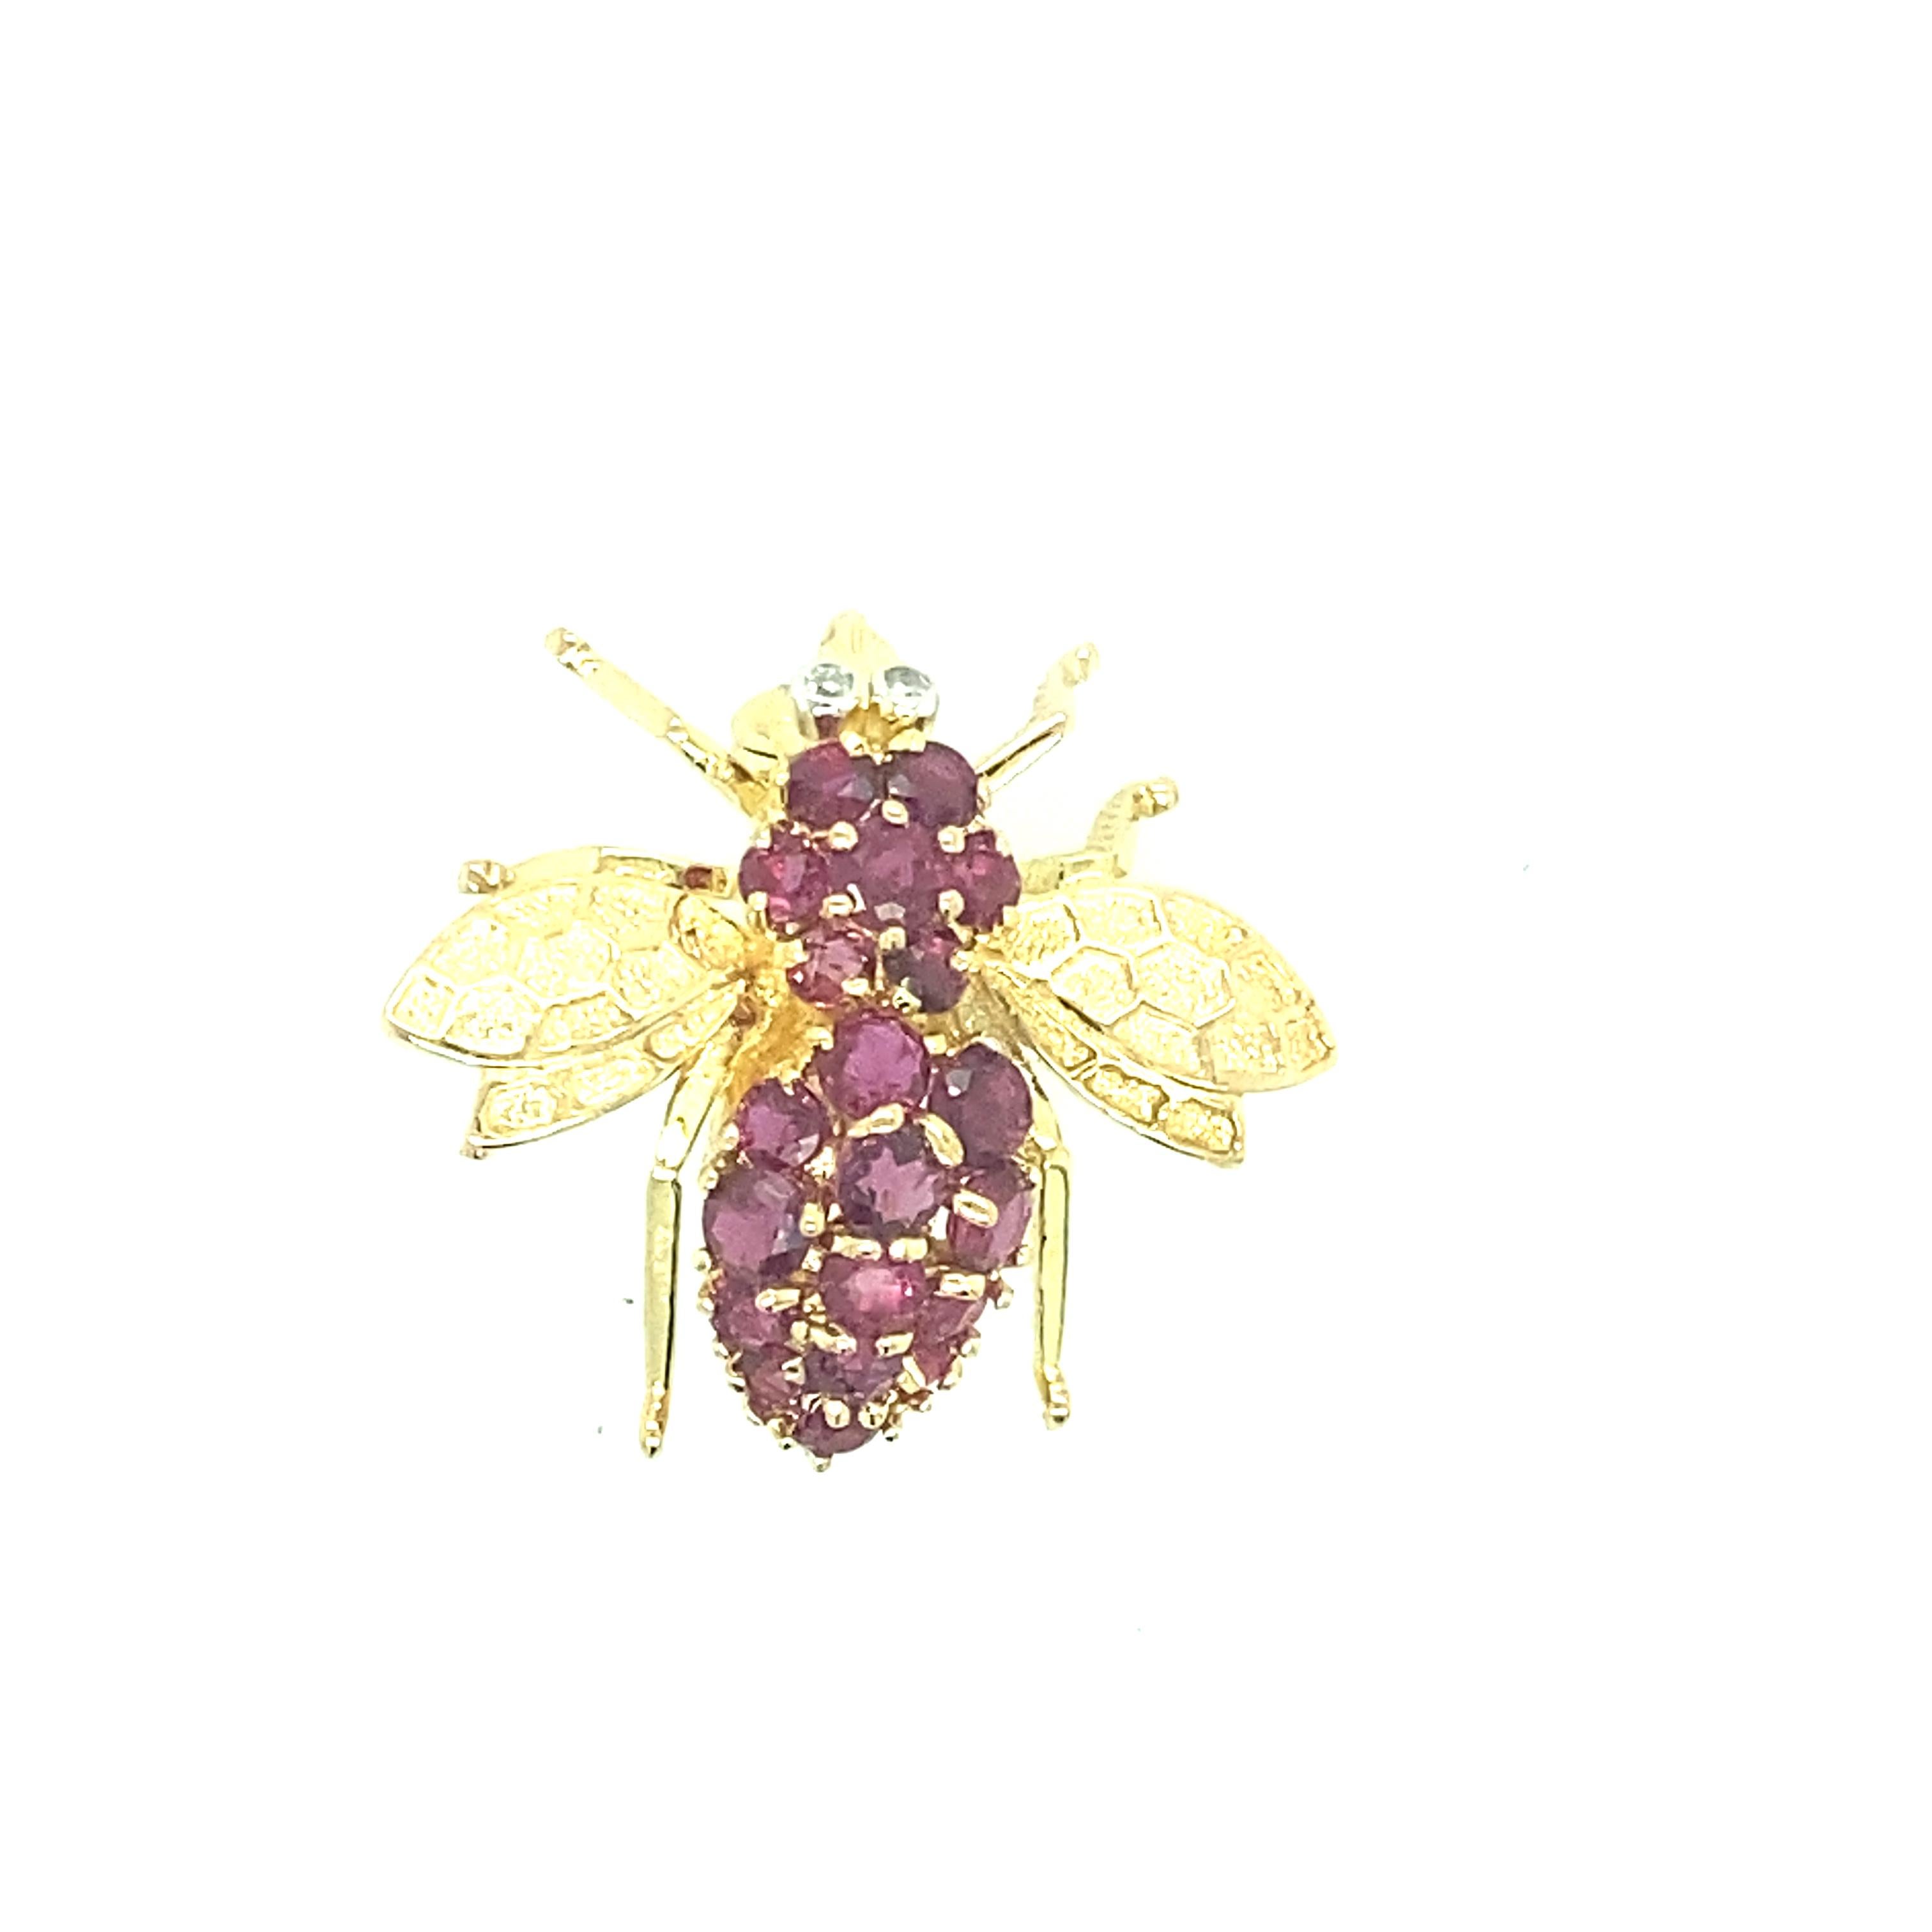 One 14 karat yellow (stamped 14K) gold bee pin set with twenty round rubies and two full cut diamonds, approximately 0.03 carat total weight with matching I/J color and SI clarity.  The pin measures 1 inch long and is complete with a traditional pin